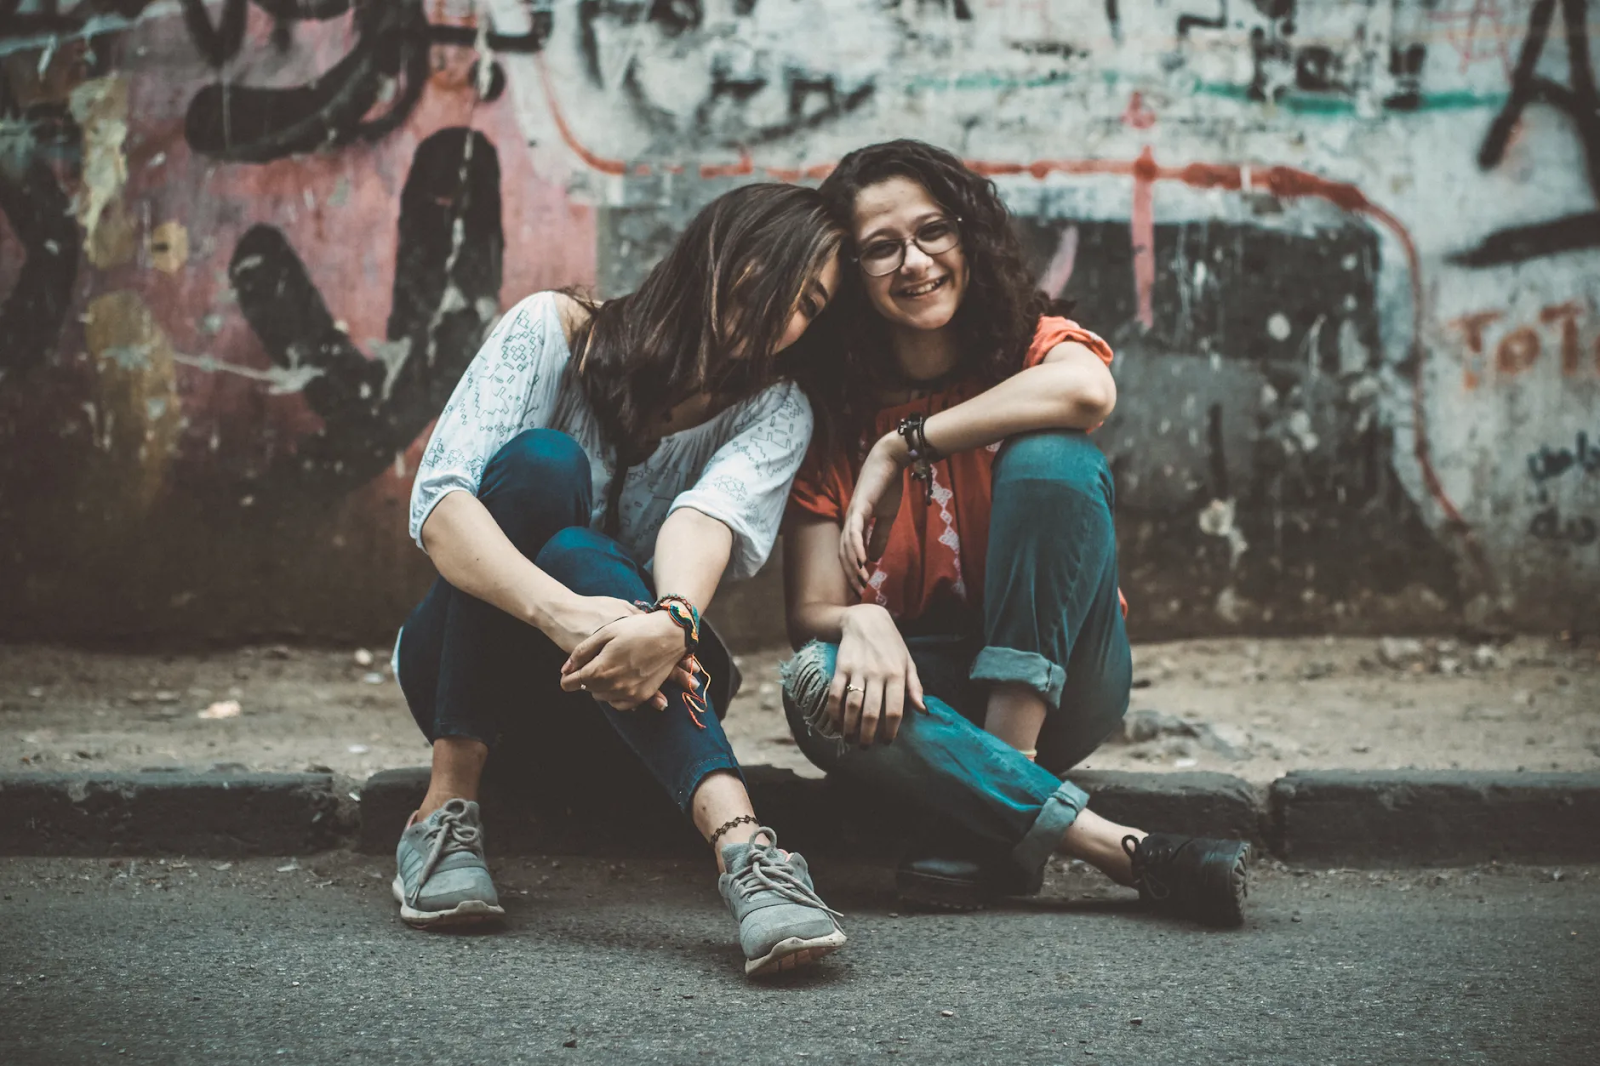 Two woman sit on a curb together in front of a graffiti-covered wall, leaning on each other and laughing